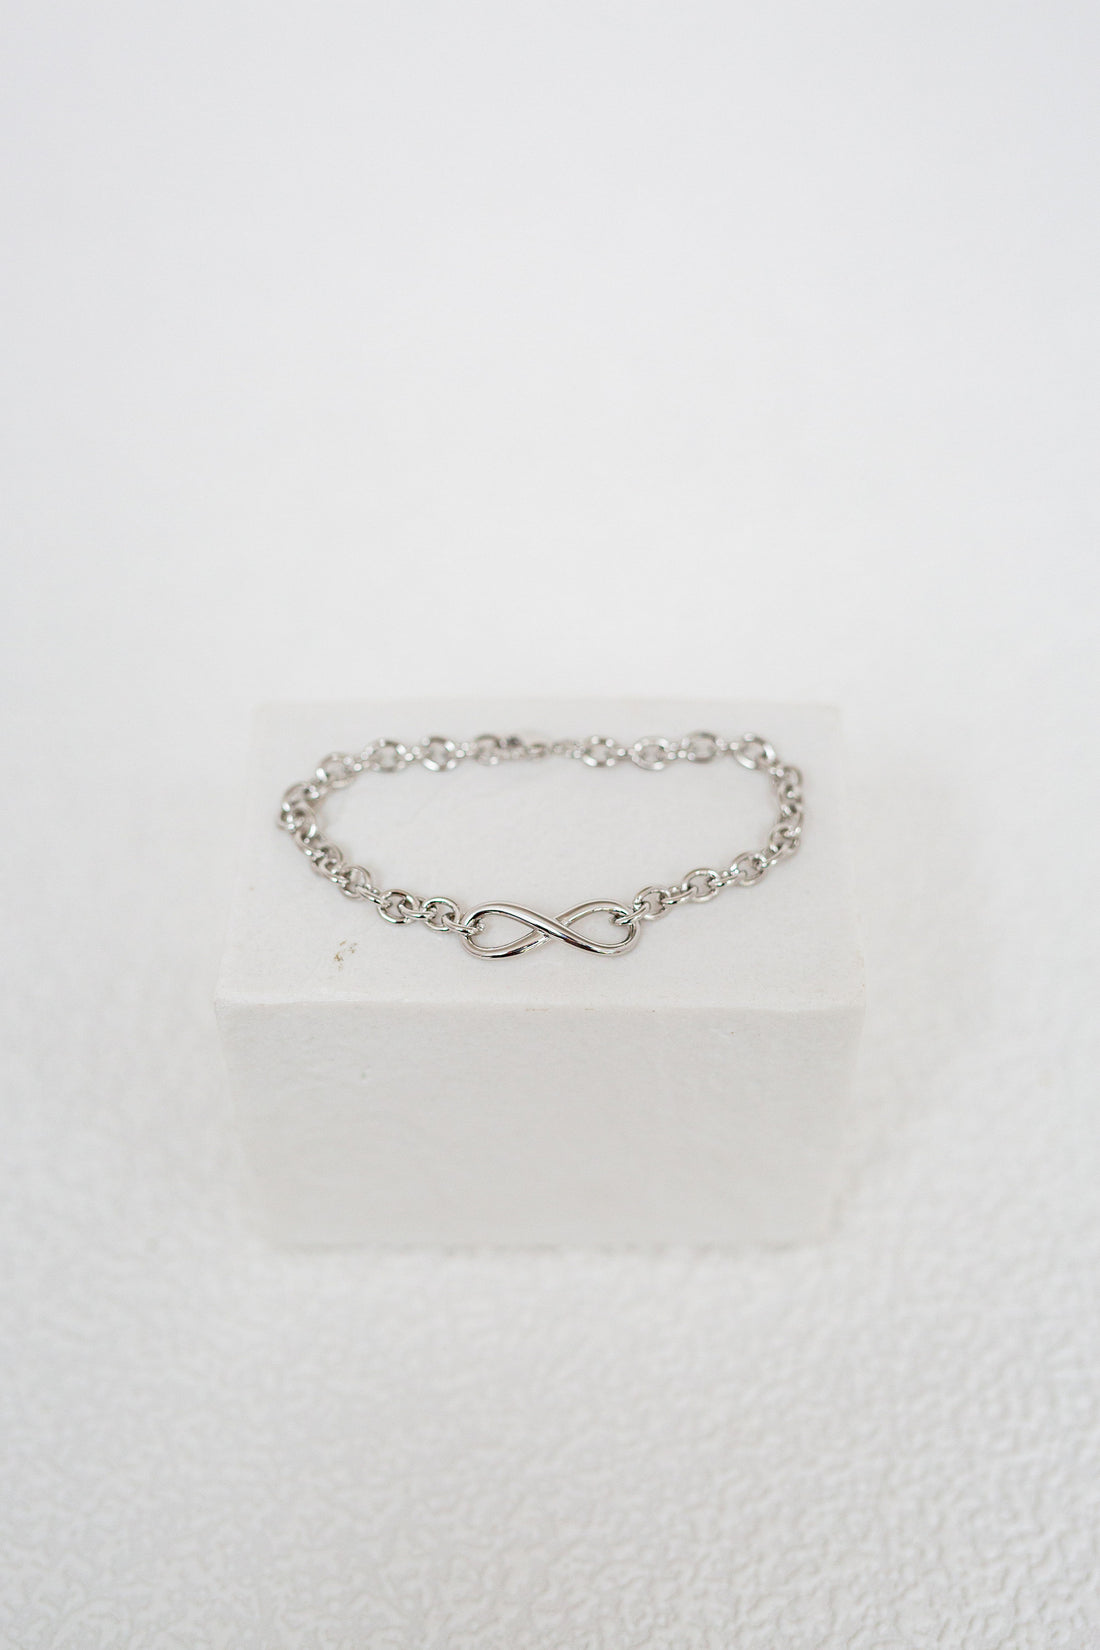 Multi Link Infinity Bracelet With Optional Engraved Charm